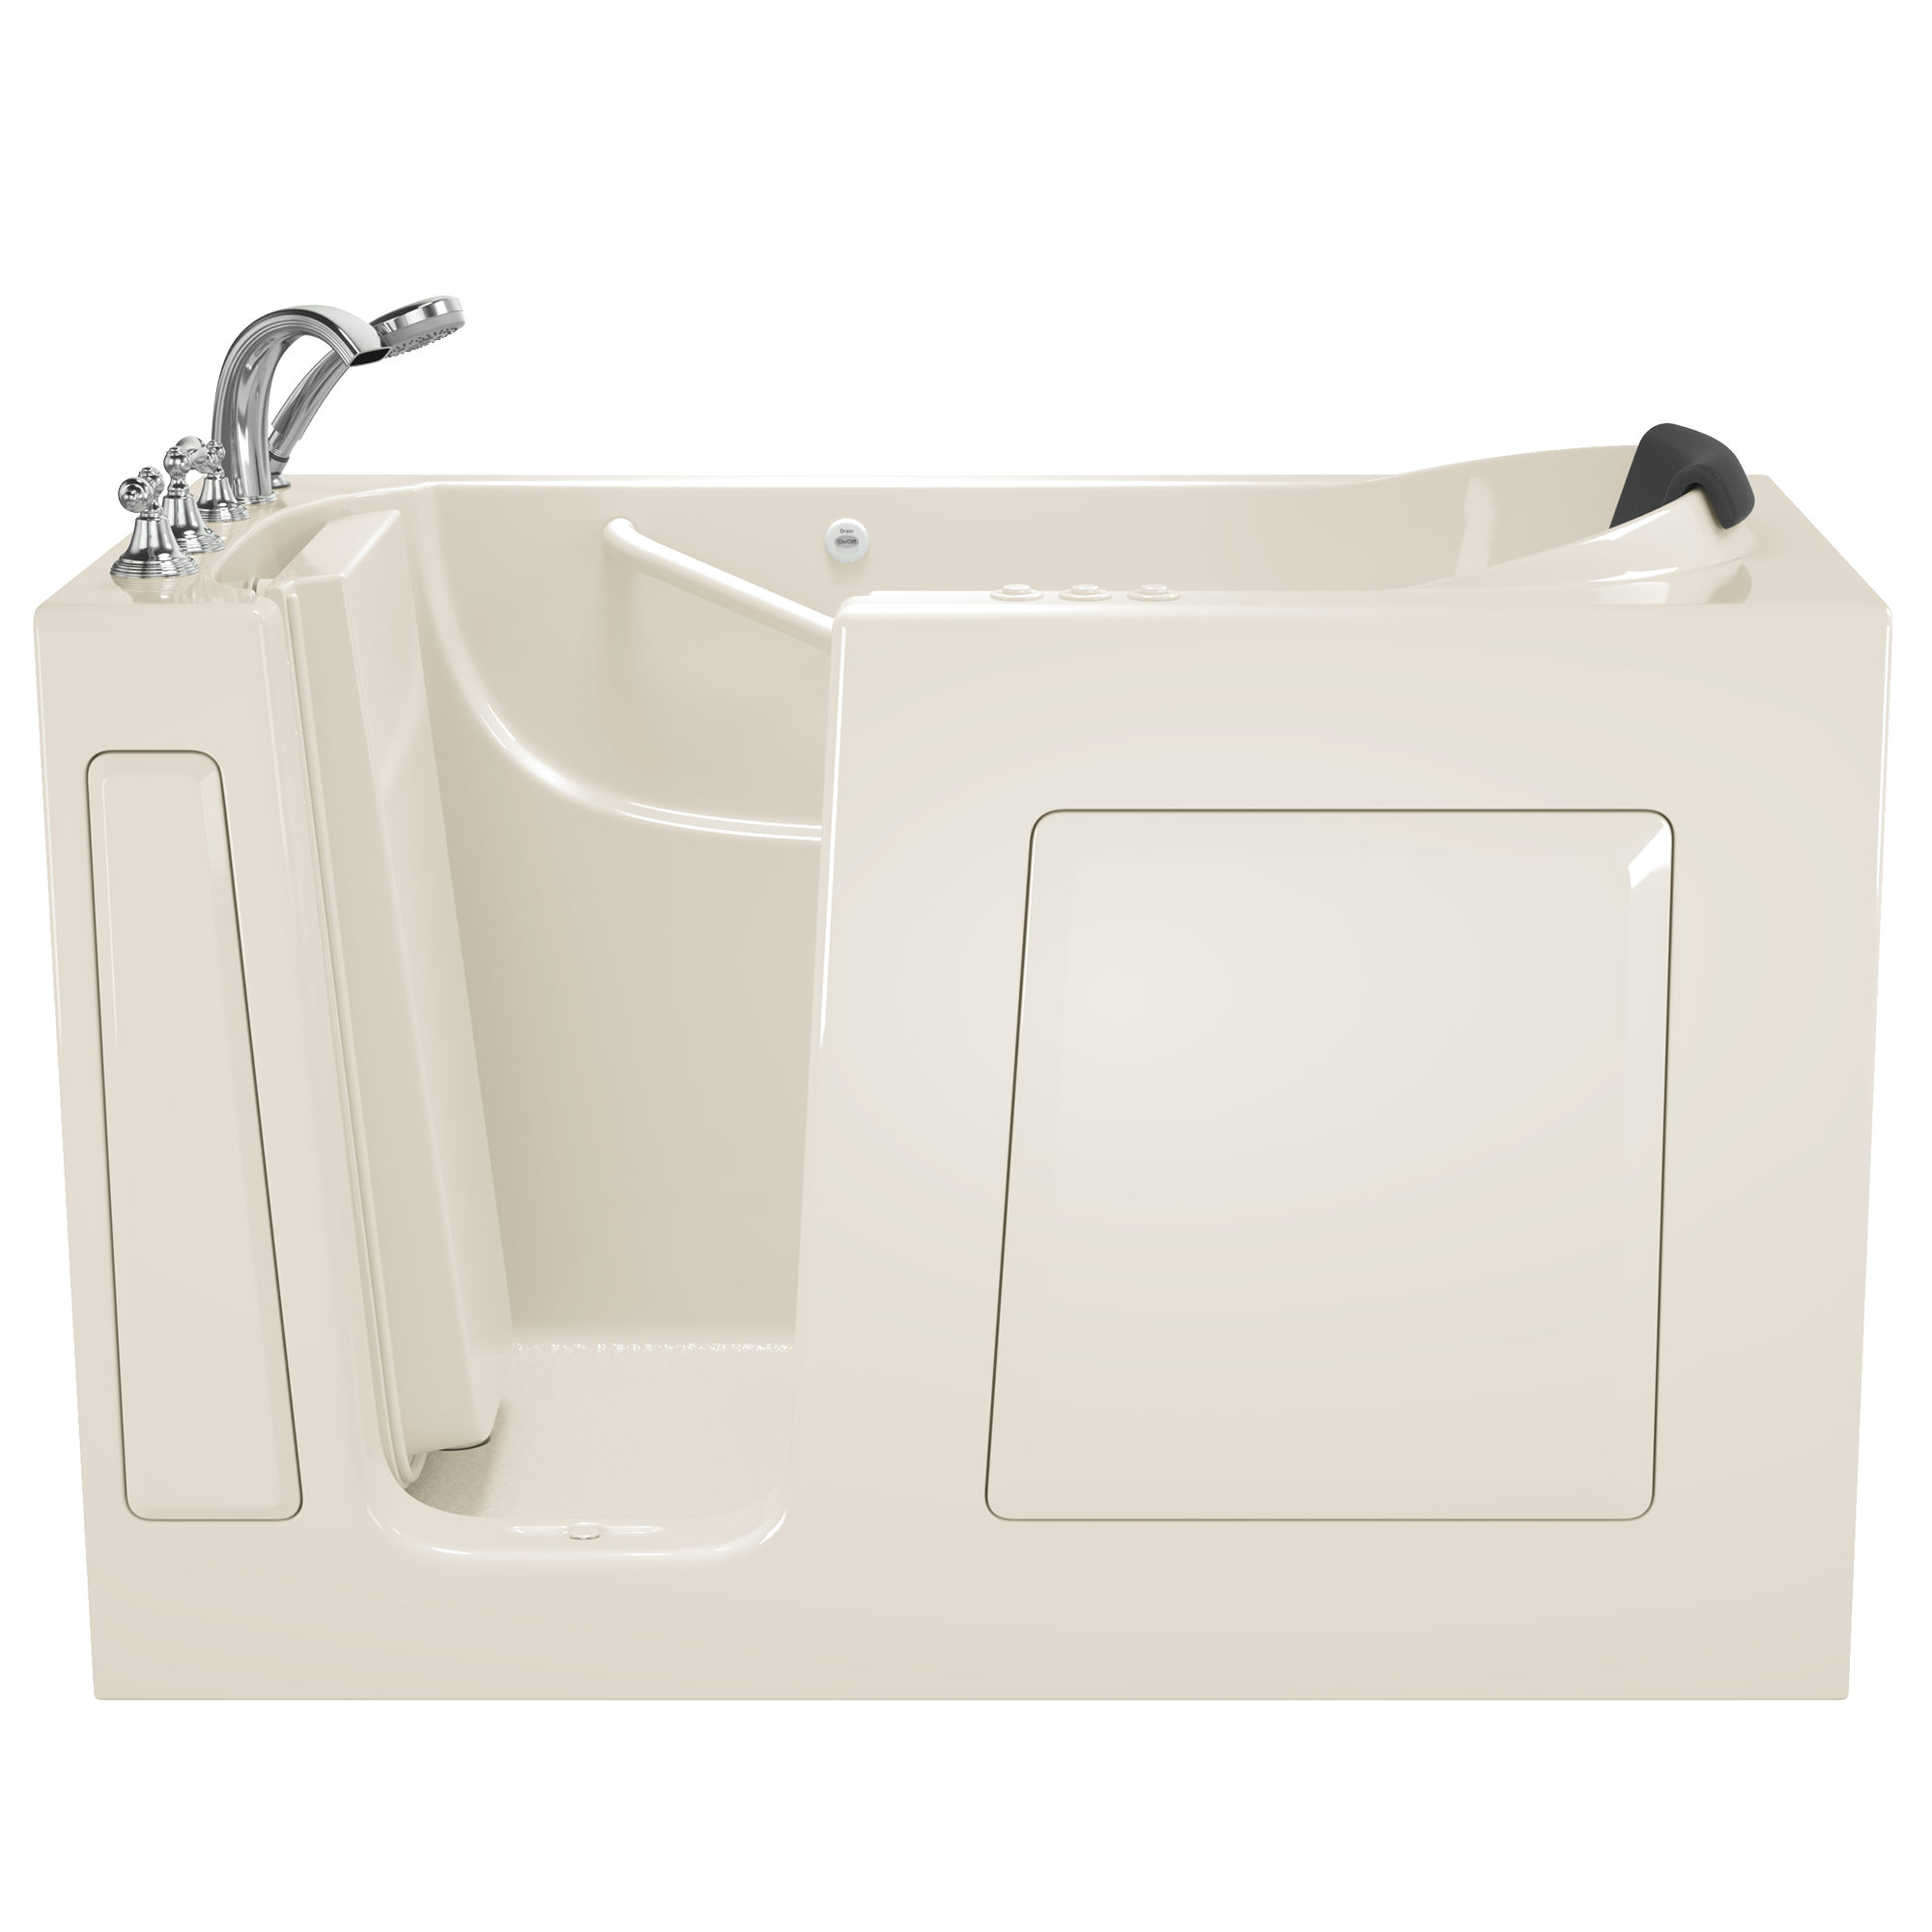 Gelcoat Premium Series 30 x 60 -Inch Walk-in Tub With Combination Air Spa and Whirlpool Systems - Left-Hand Drain With Faucet